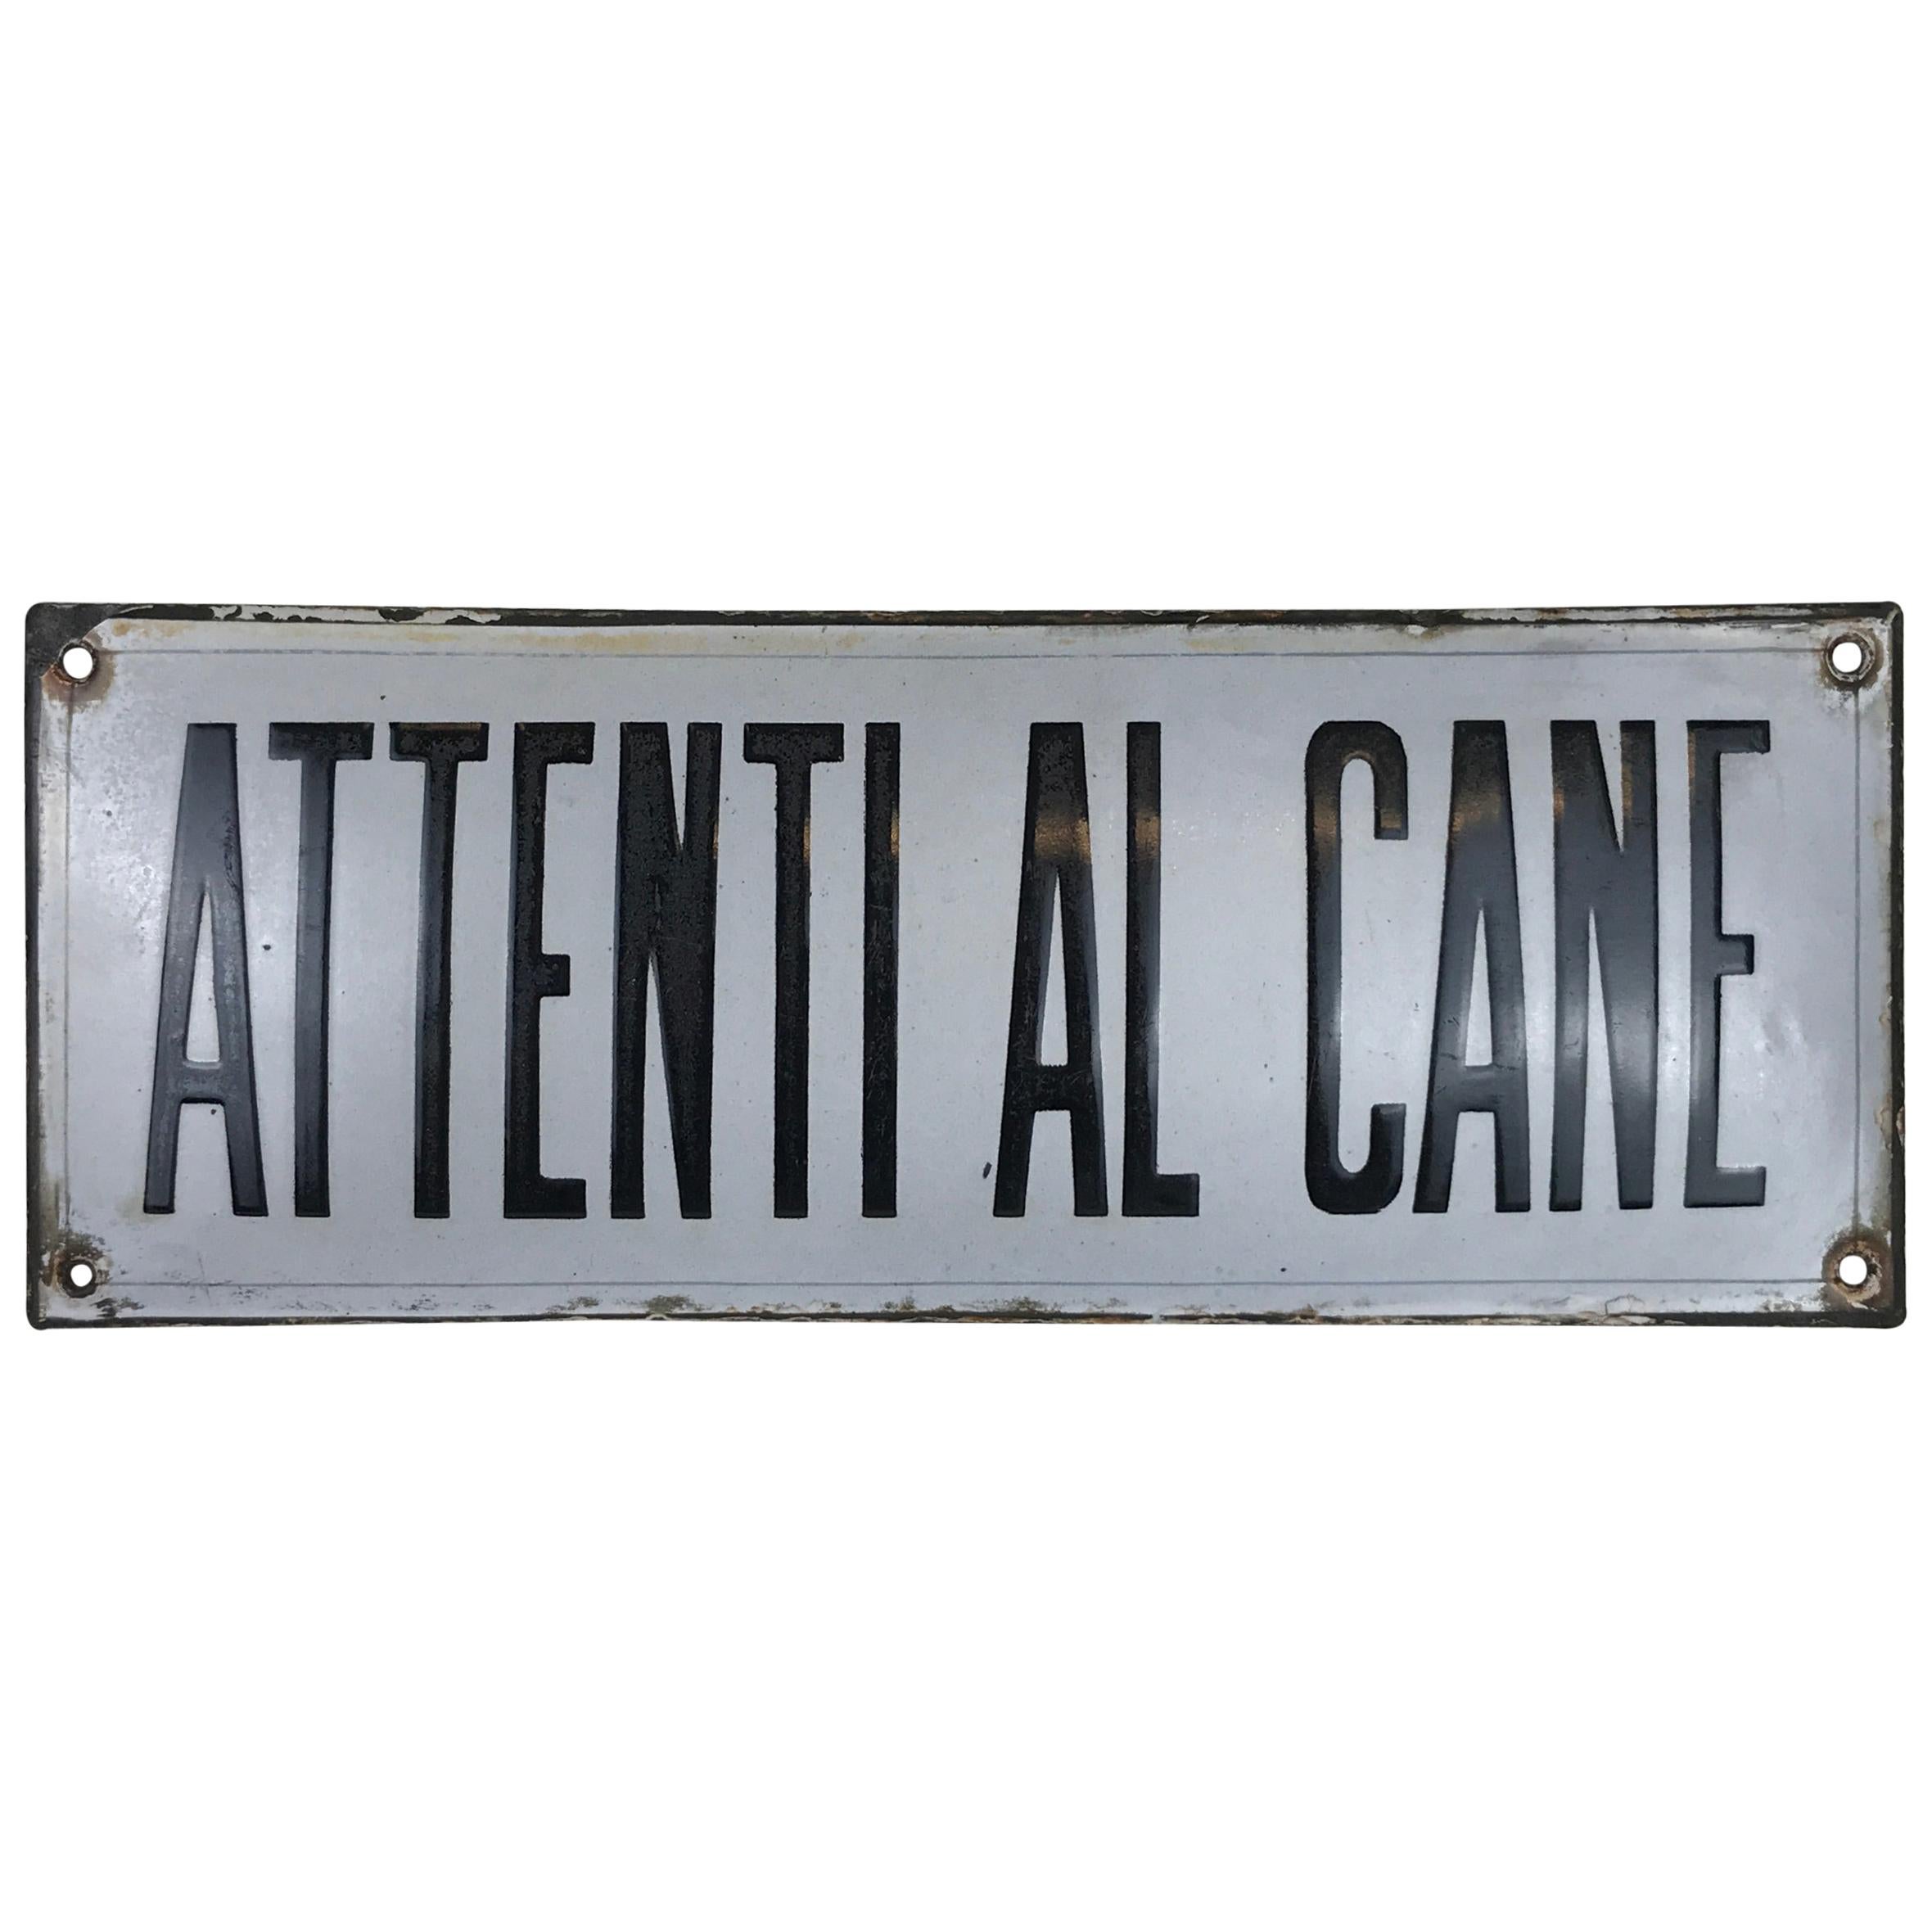 1930s Vintage Italian Enamel Metal Sign "Attenti al Cane" ‘Beware of the Dog’ For Sale